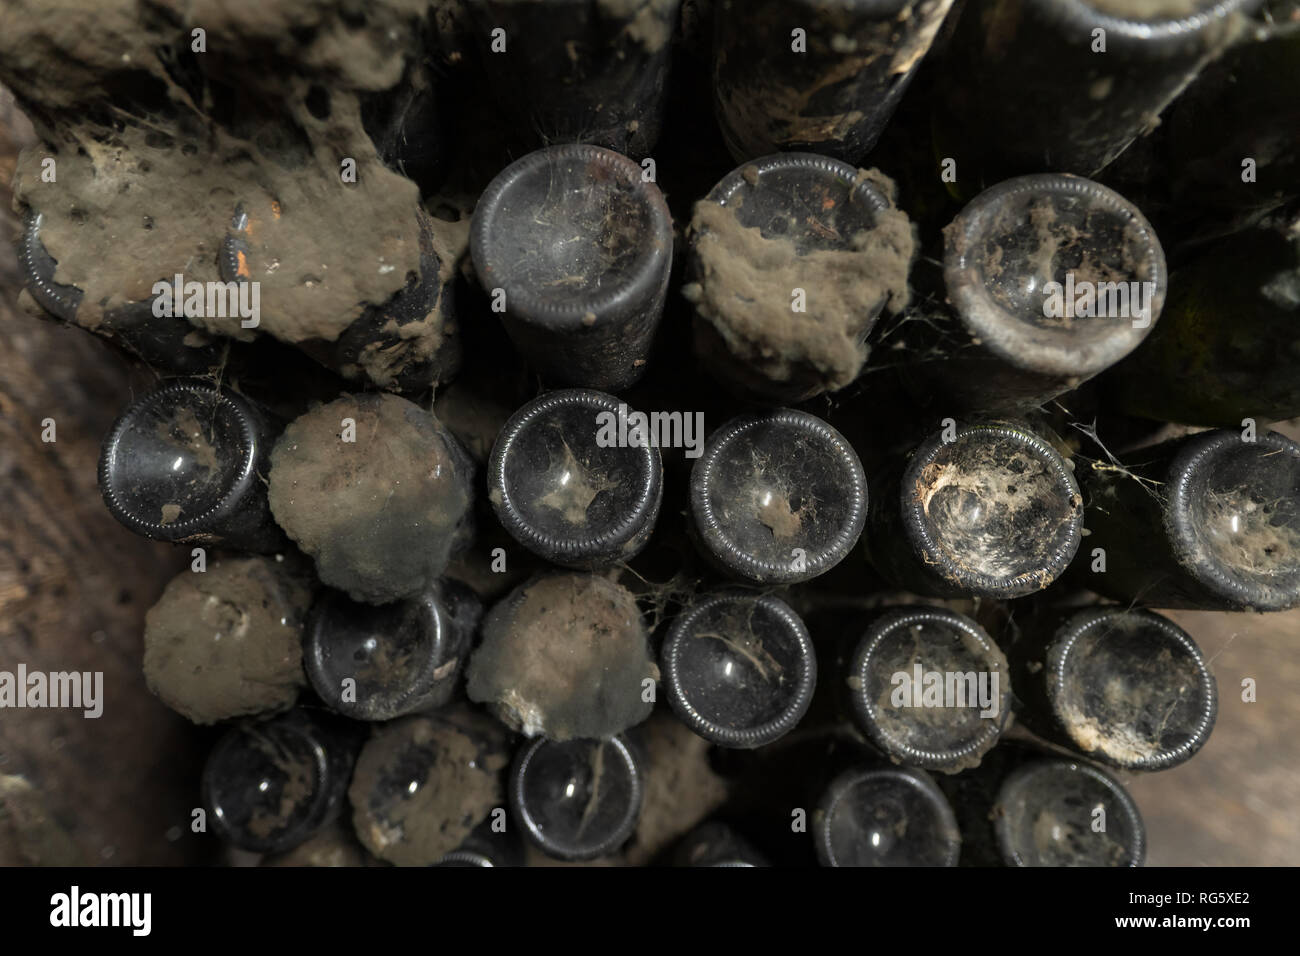 Mold, cobweb and dust on vintage wine bottles in an underground cellar Stock Photo